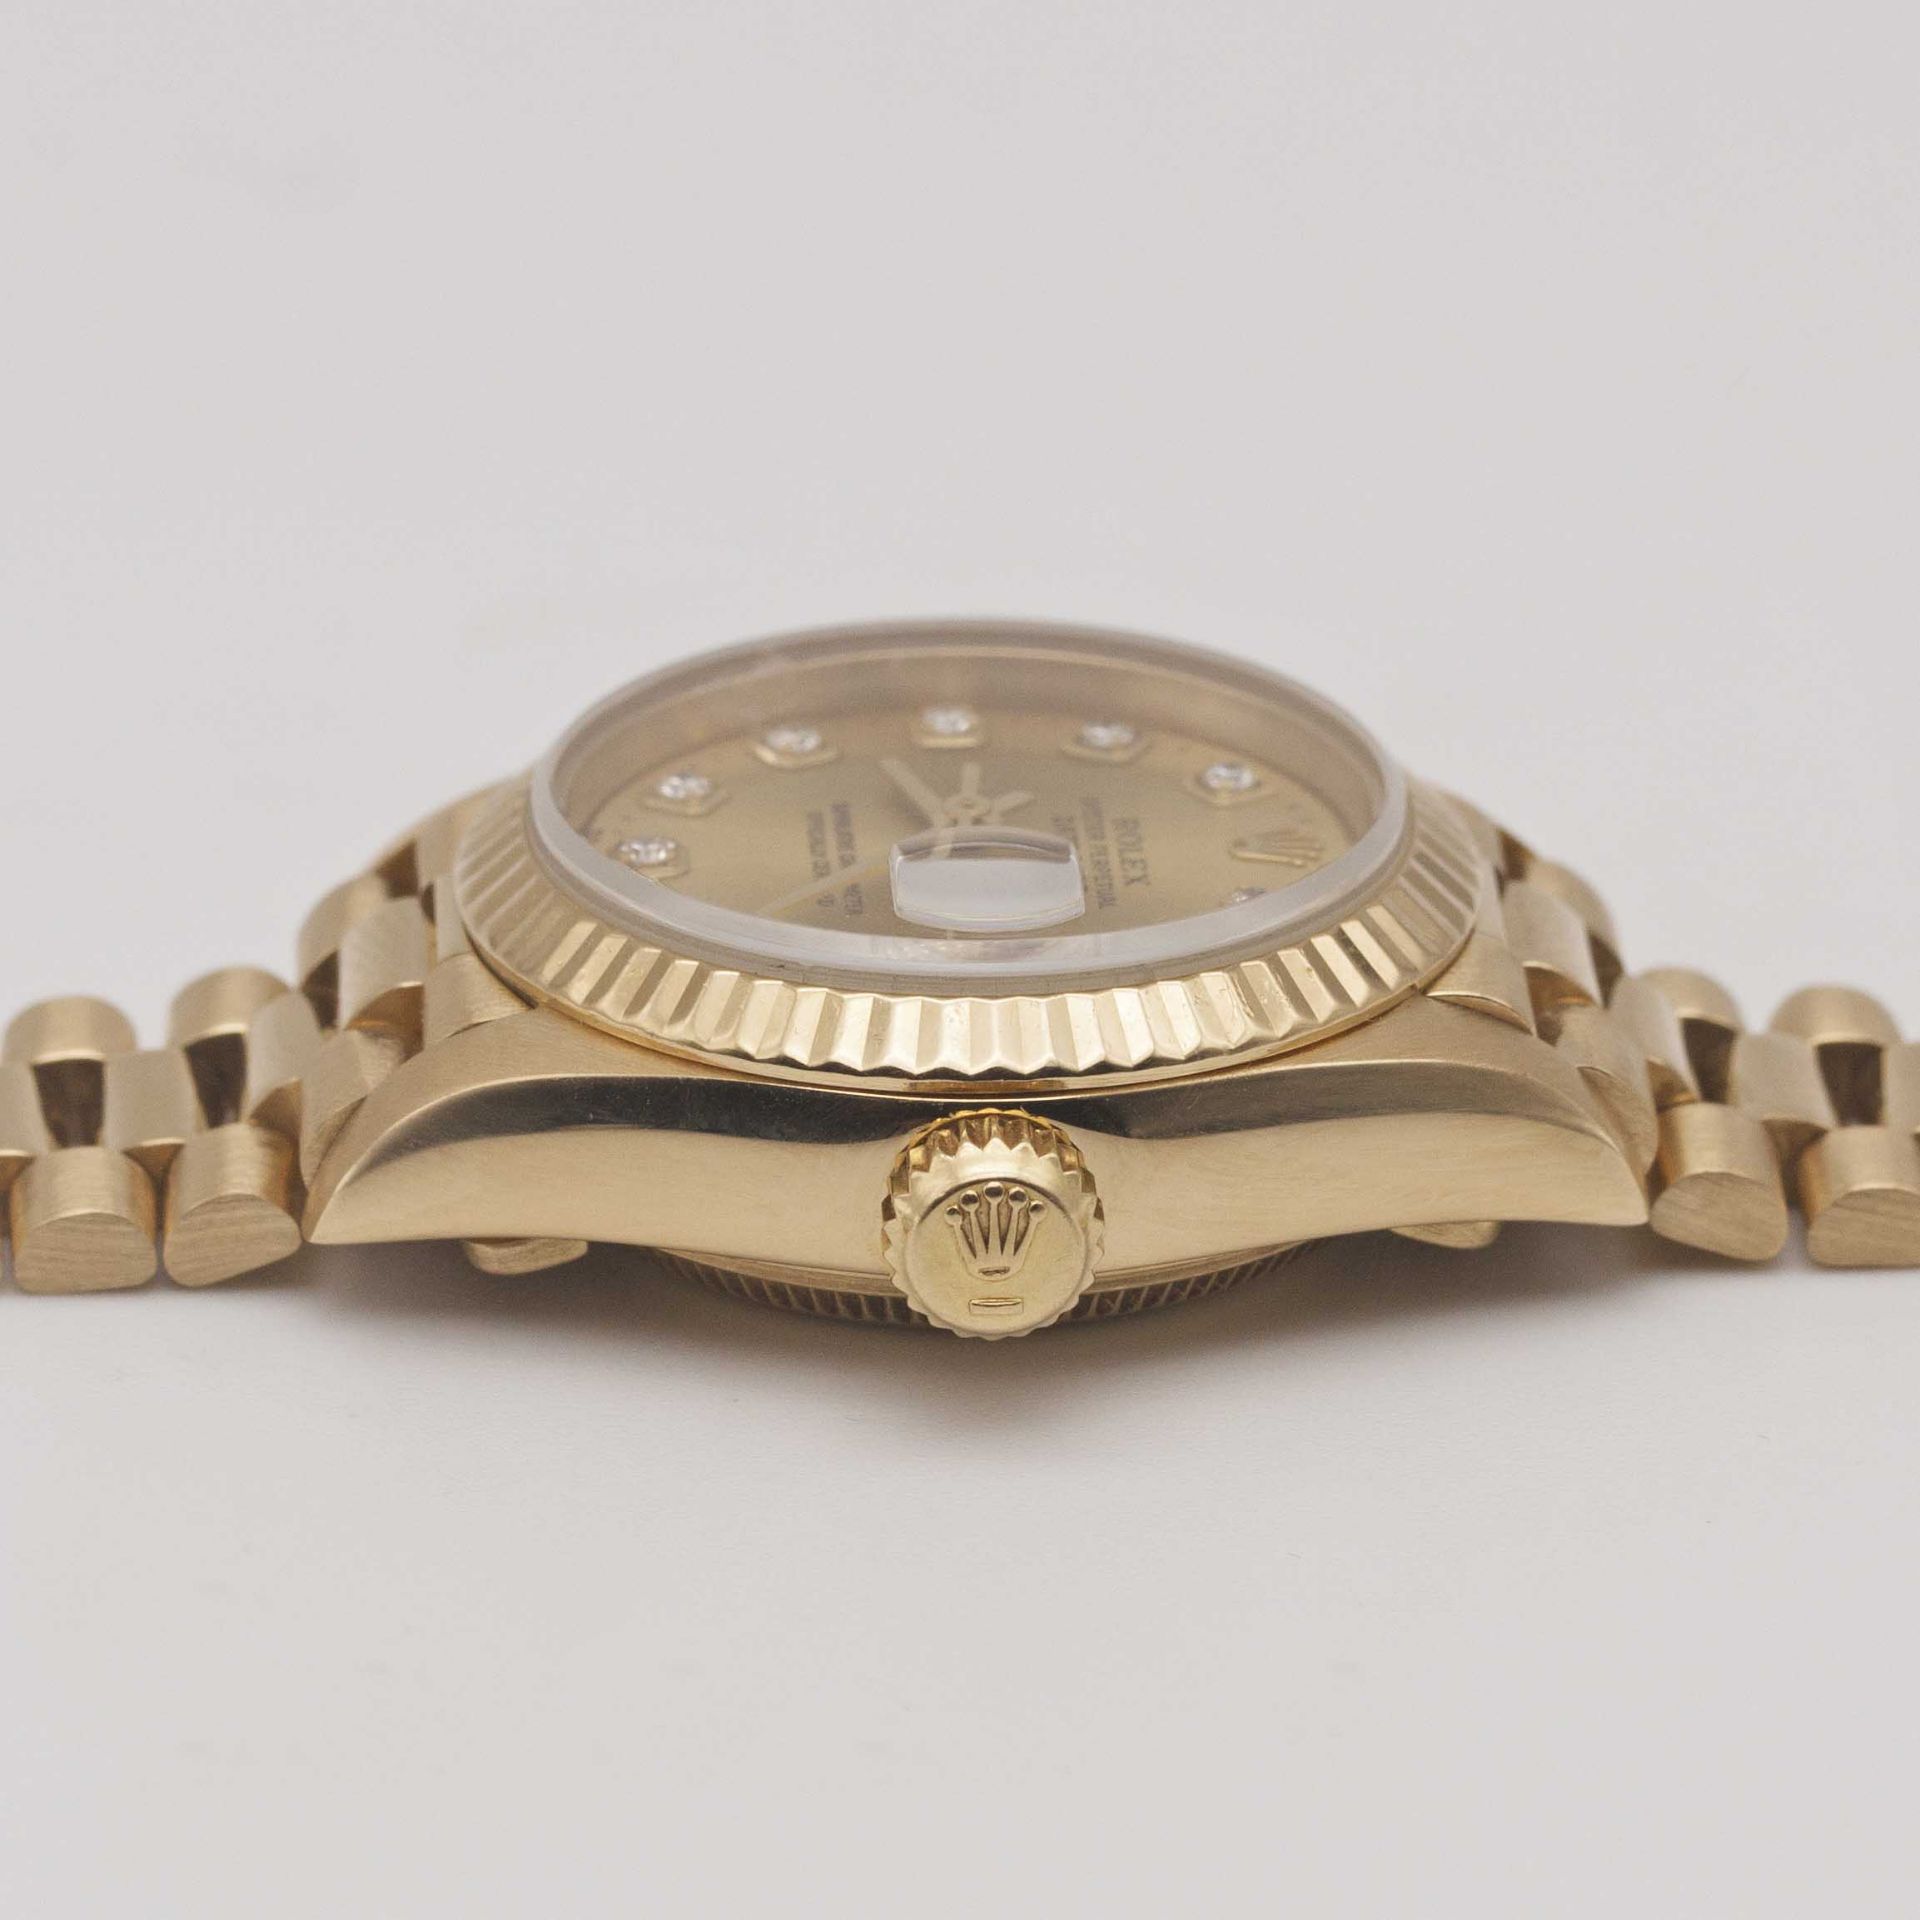 A LADIES 18K SOLID GOLD ROLEX OYSTER PERPETUAL DATEJUST BRACELET WATCH CIRCA 1996, REF. 69178 WITH - Image 8 of 12